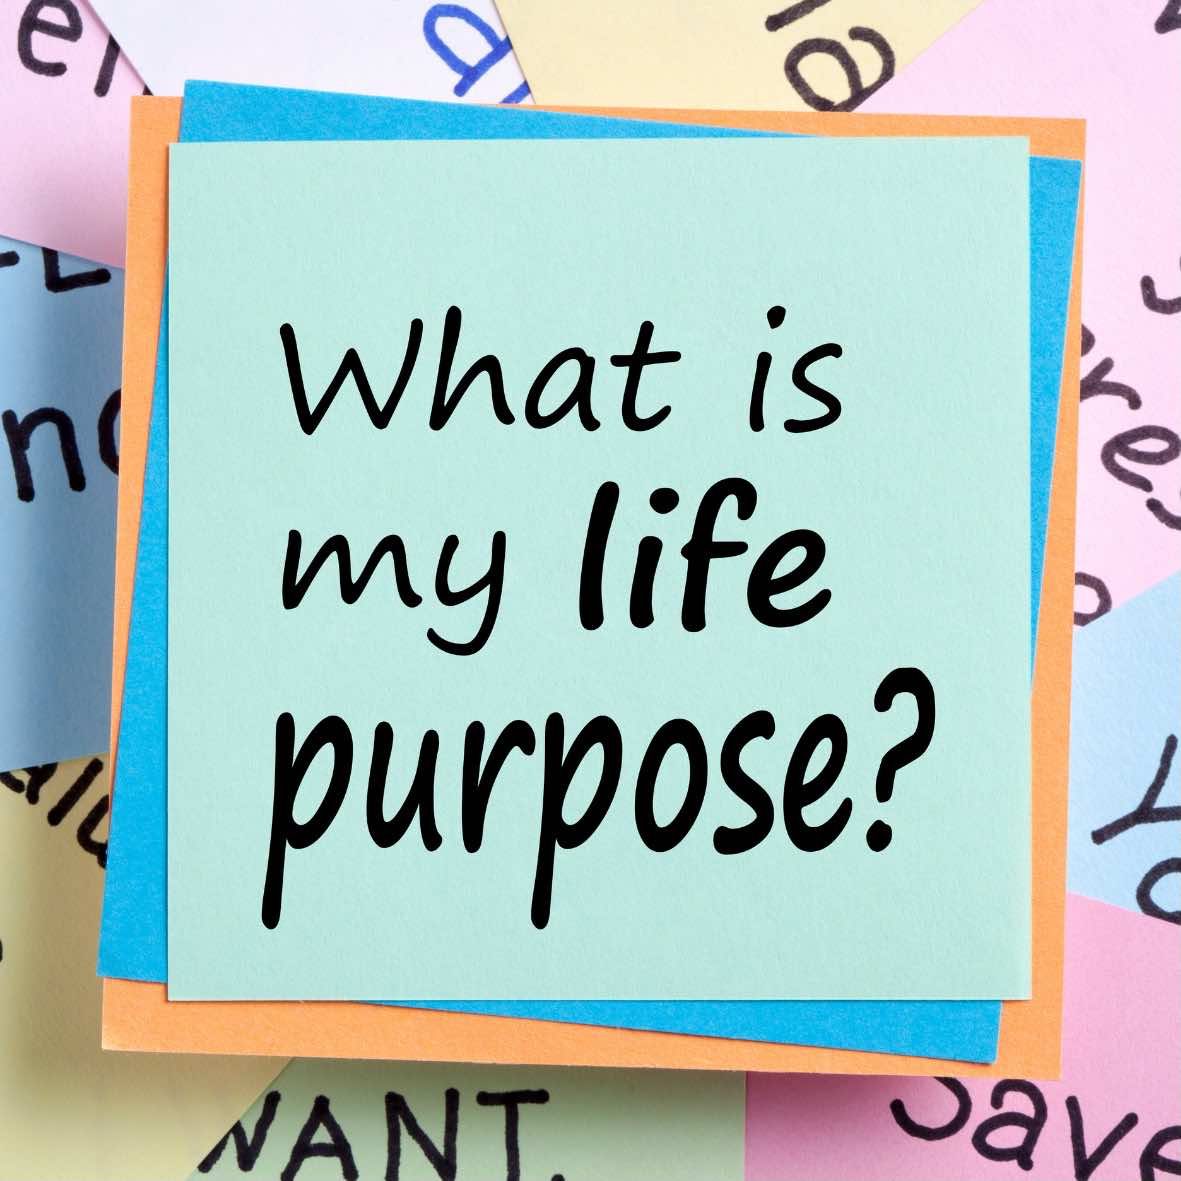 Purpose Is Everything